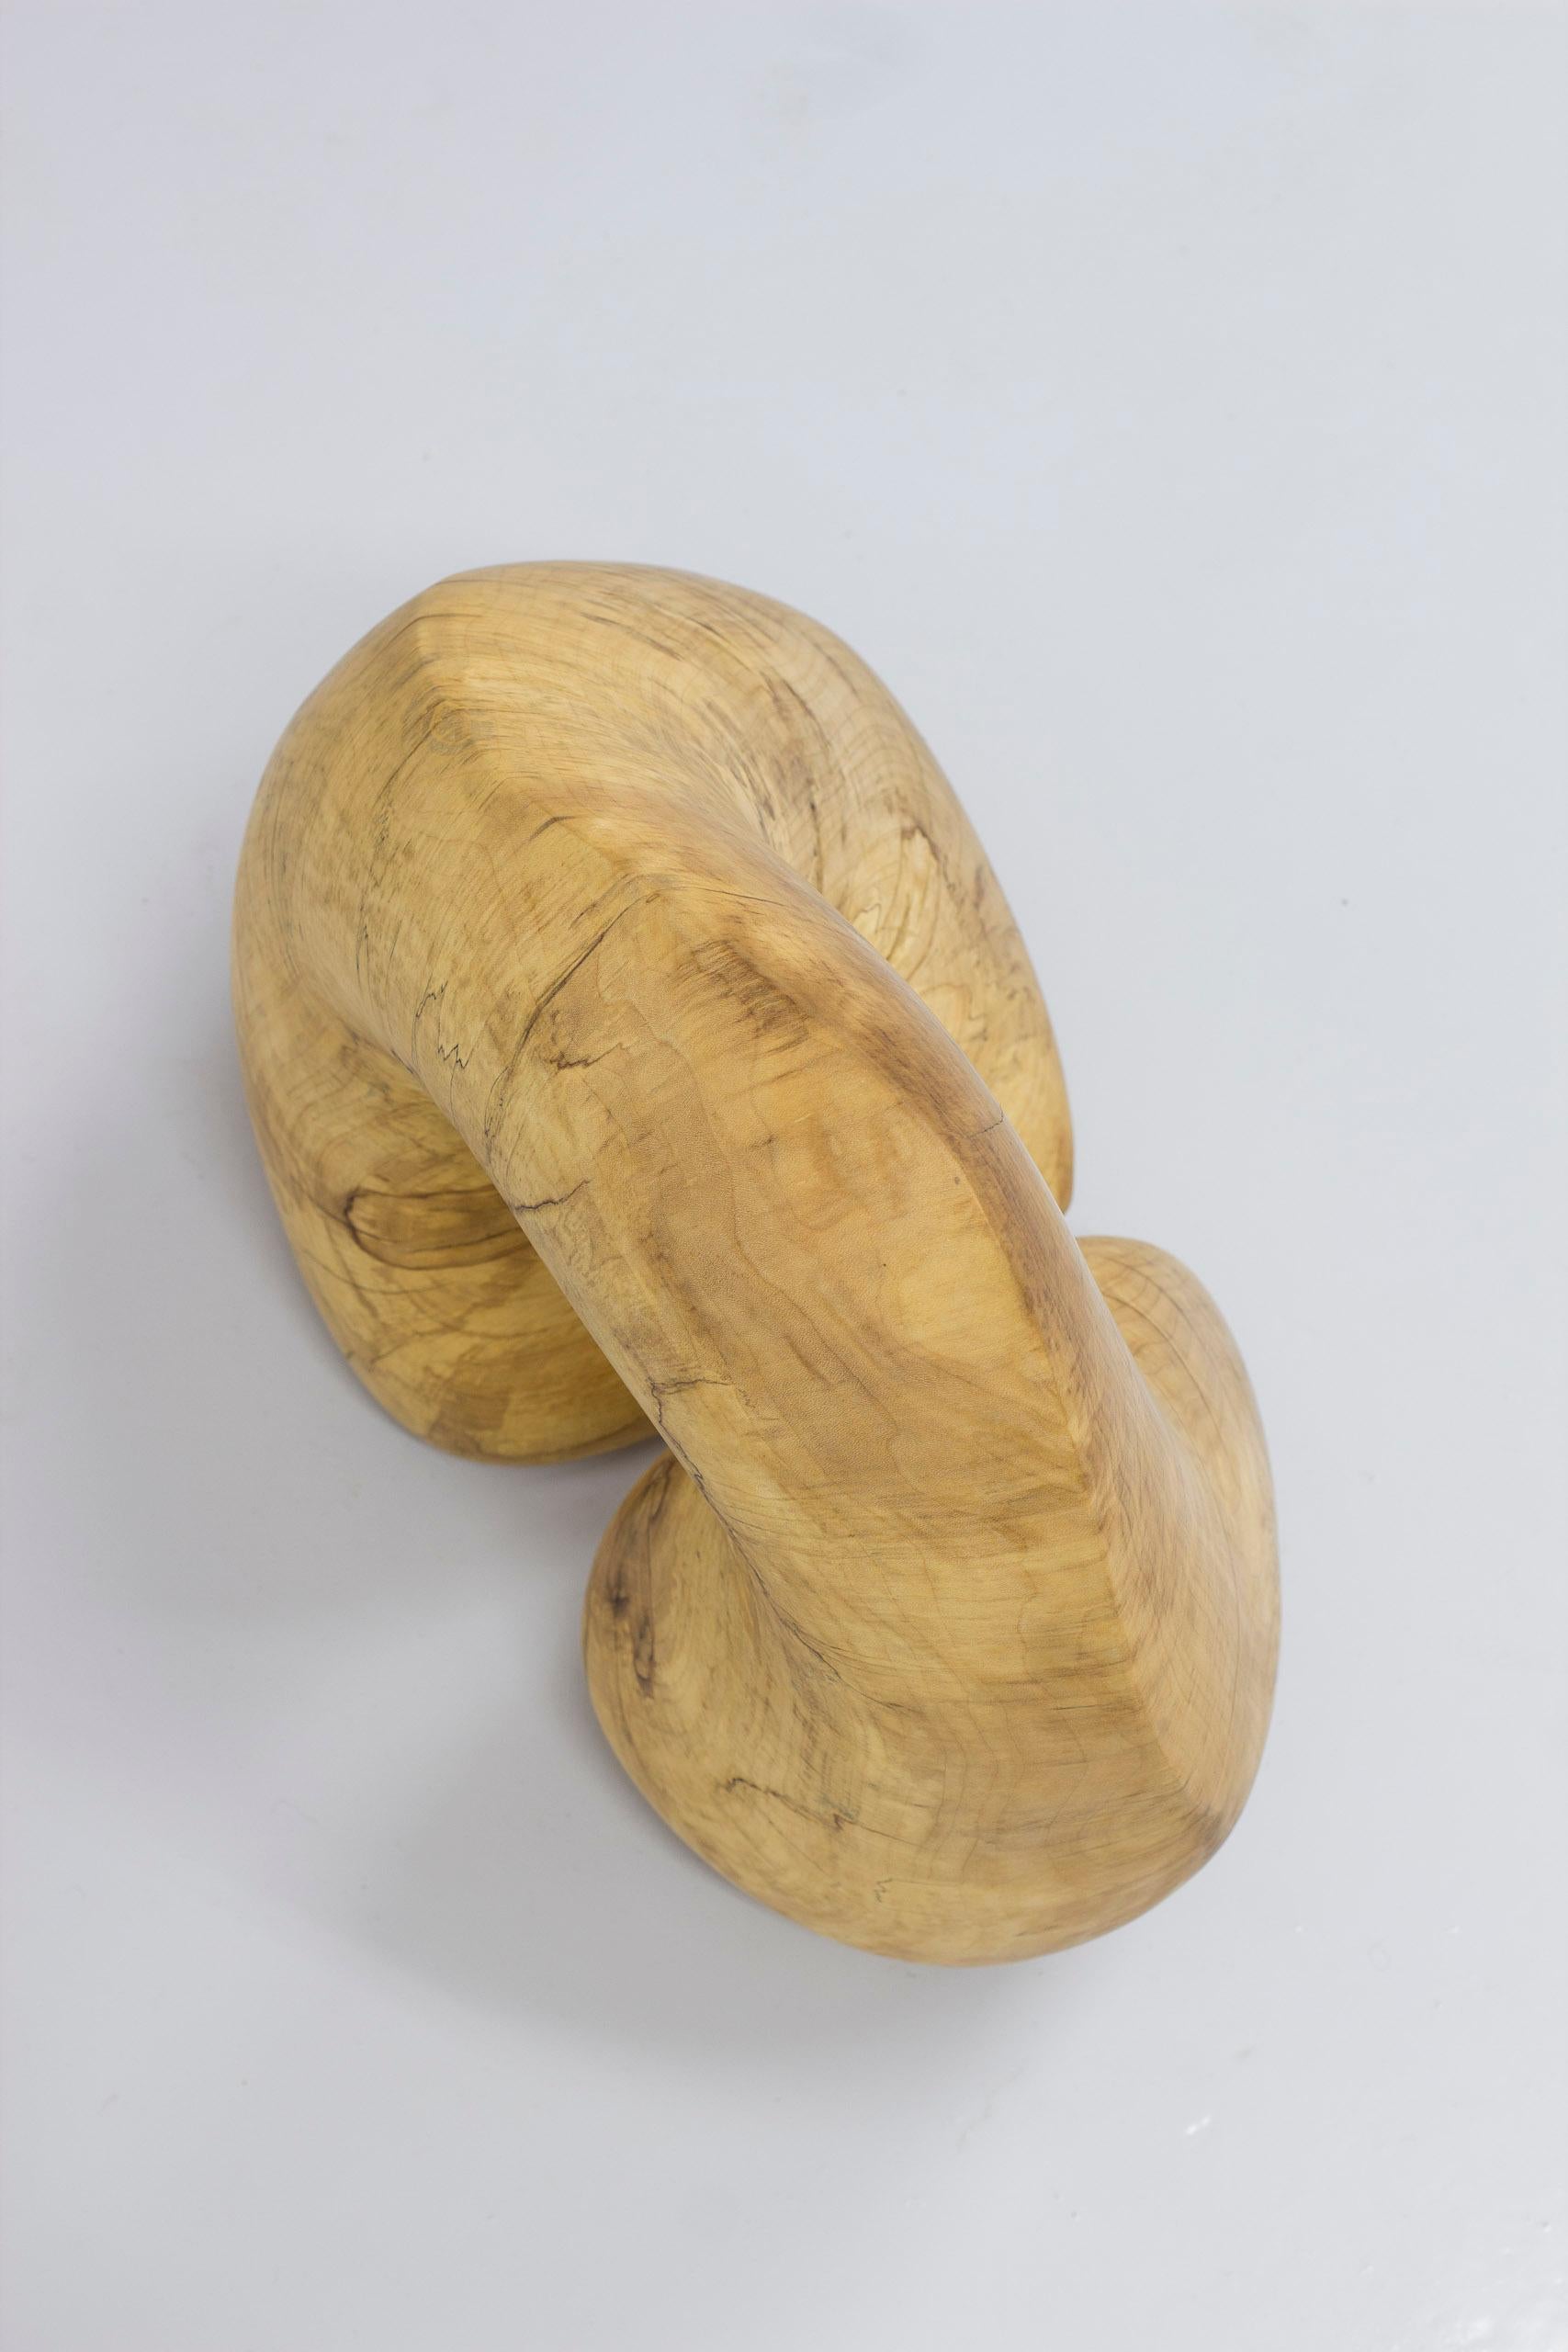 Danish free form sculpture in maple, Denmark, 1950-60s, Organic For Sale 4